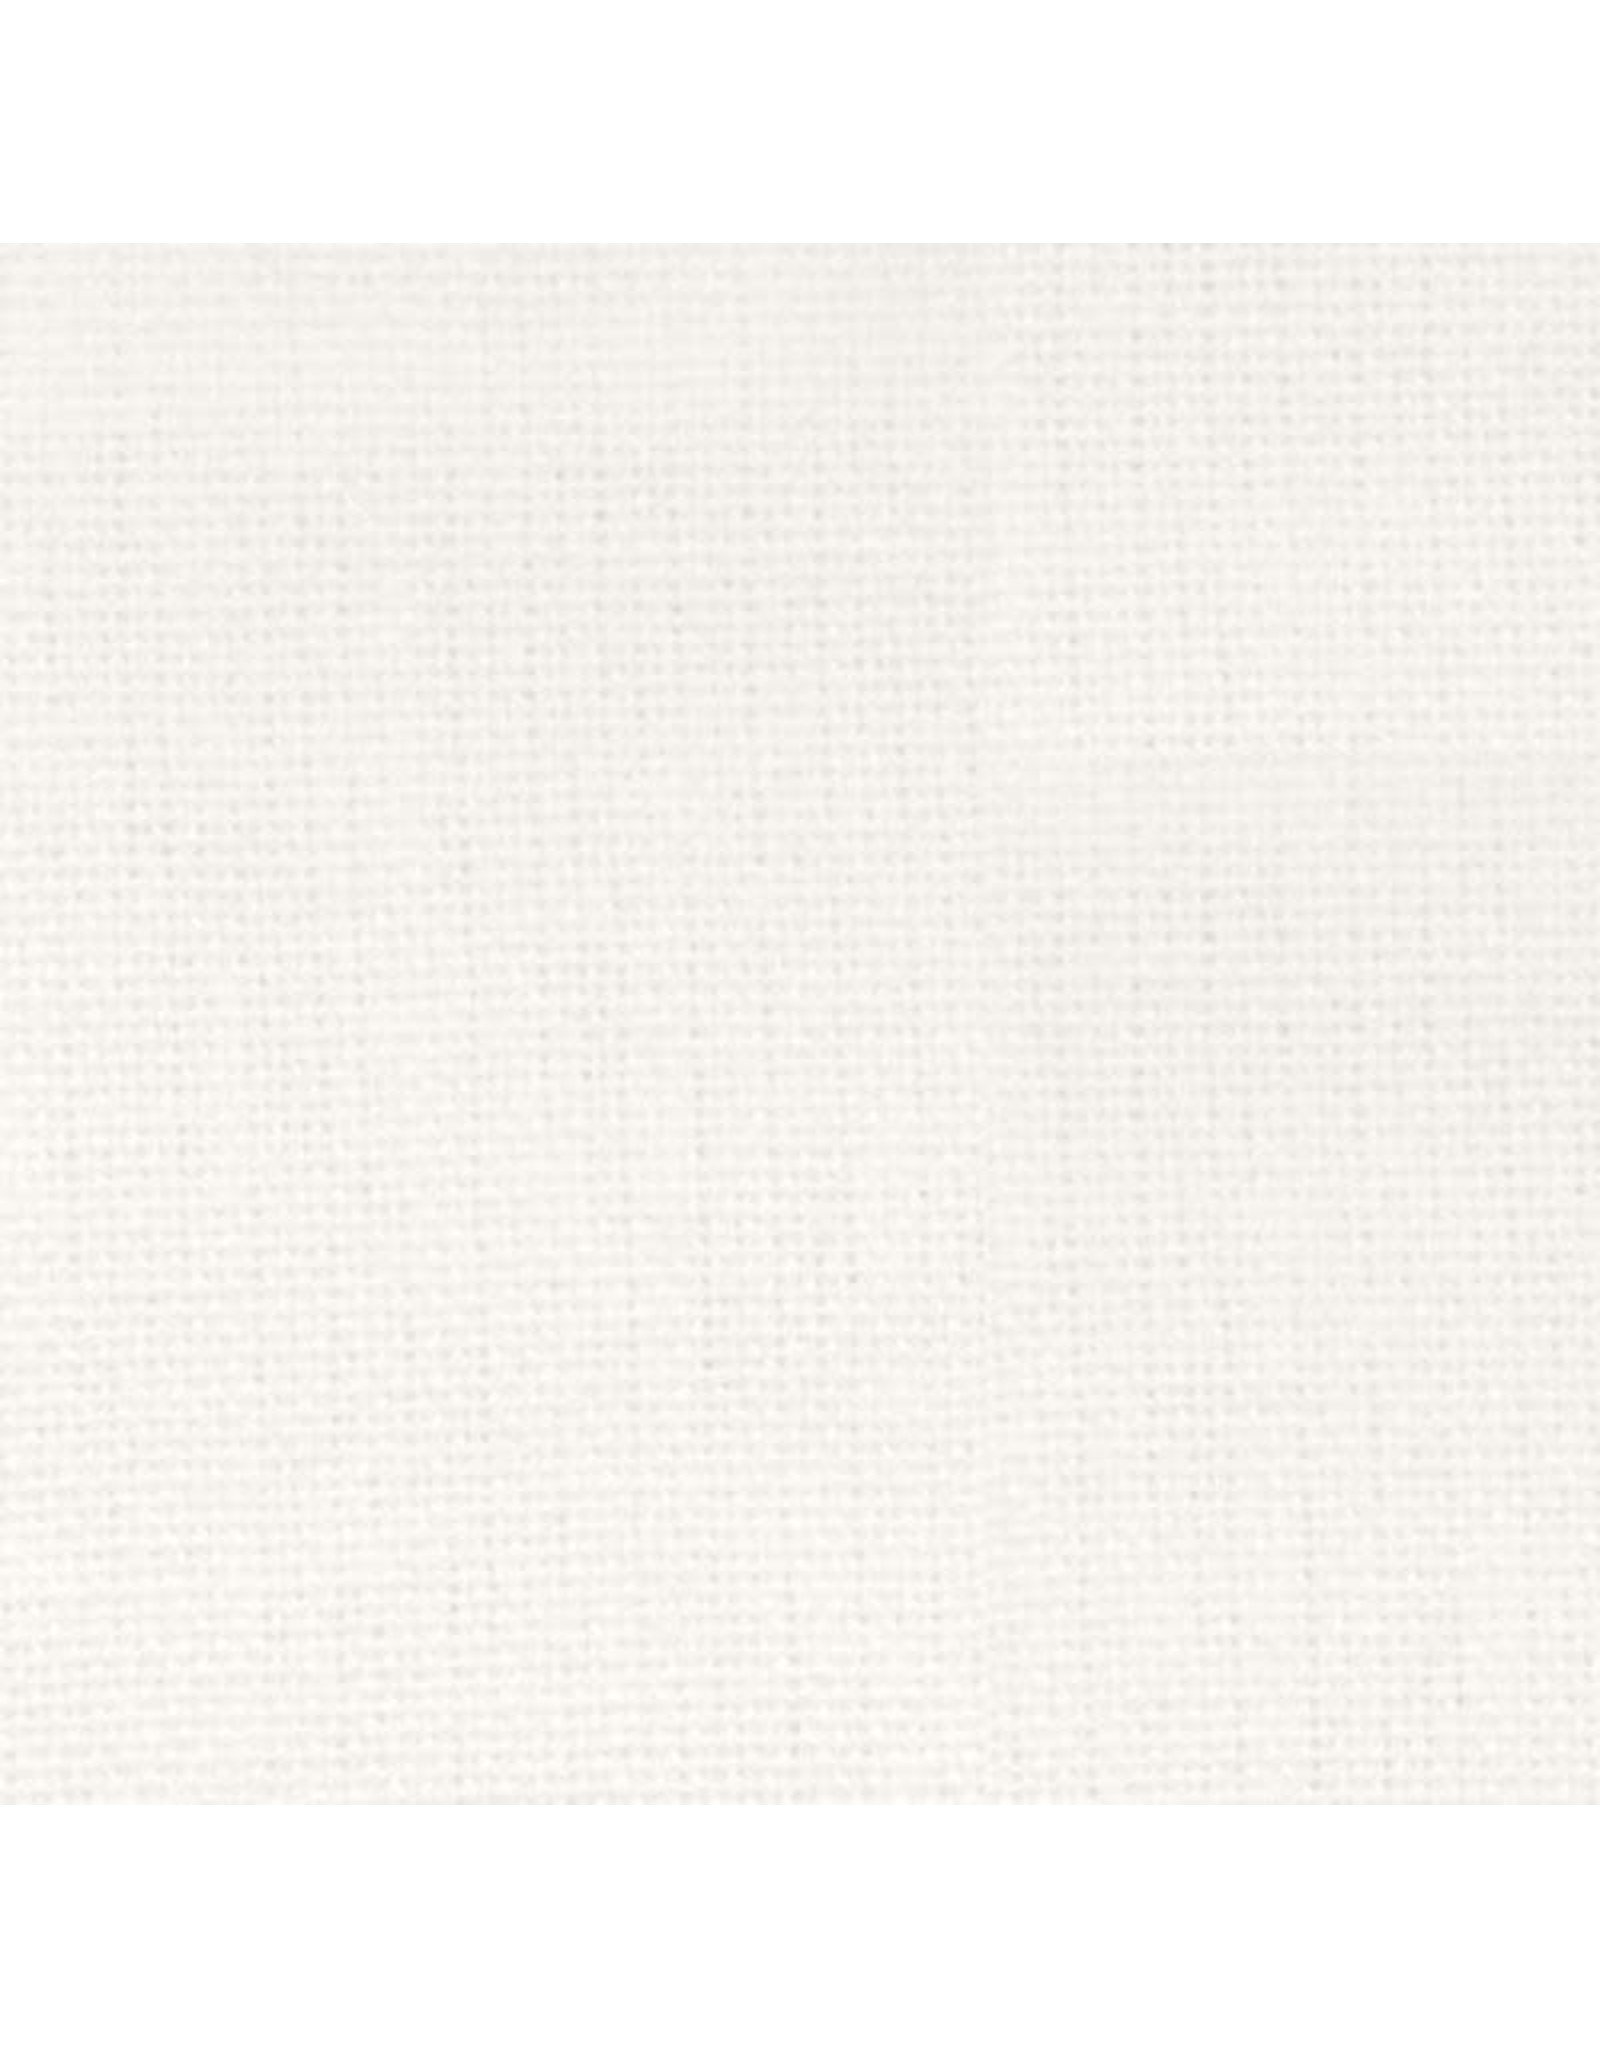 Tea or Kitchen Towel, White, Plain Hem, Perfect for Embroidery